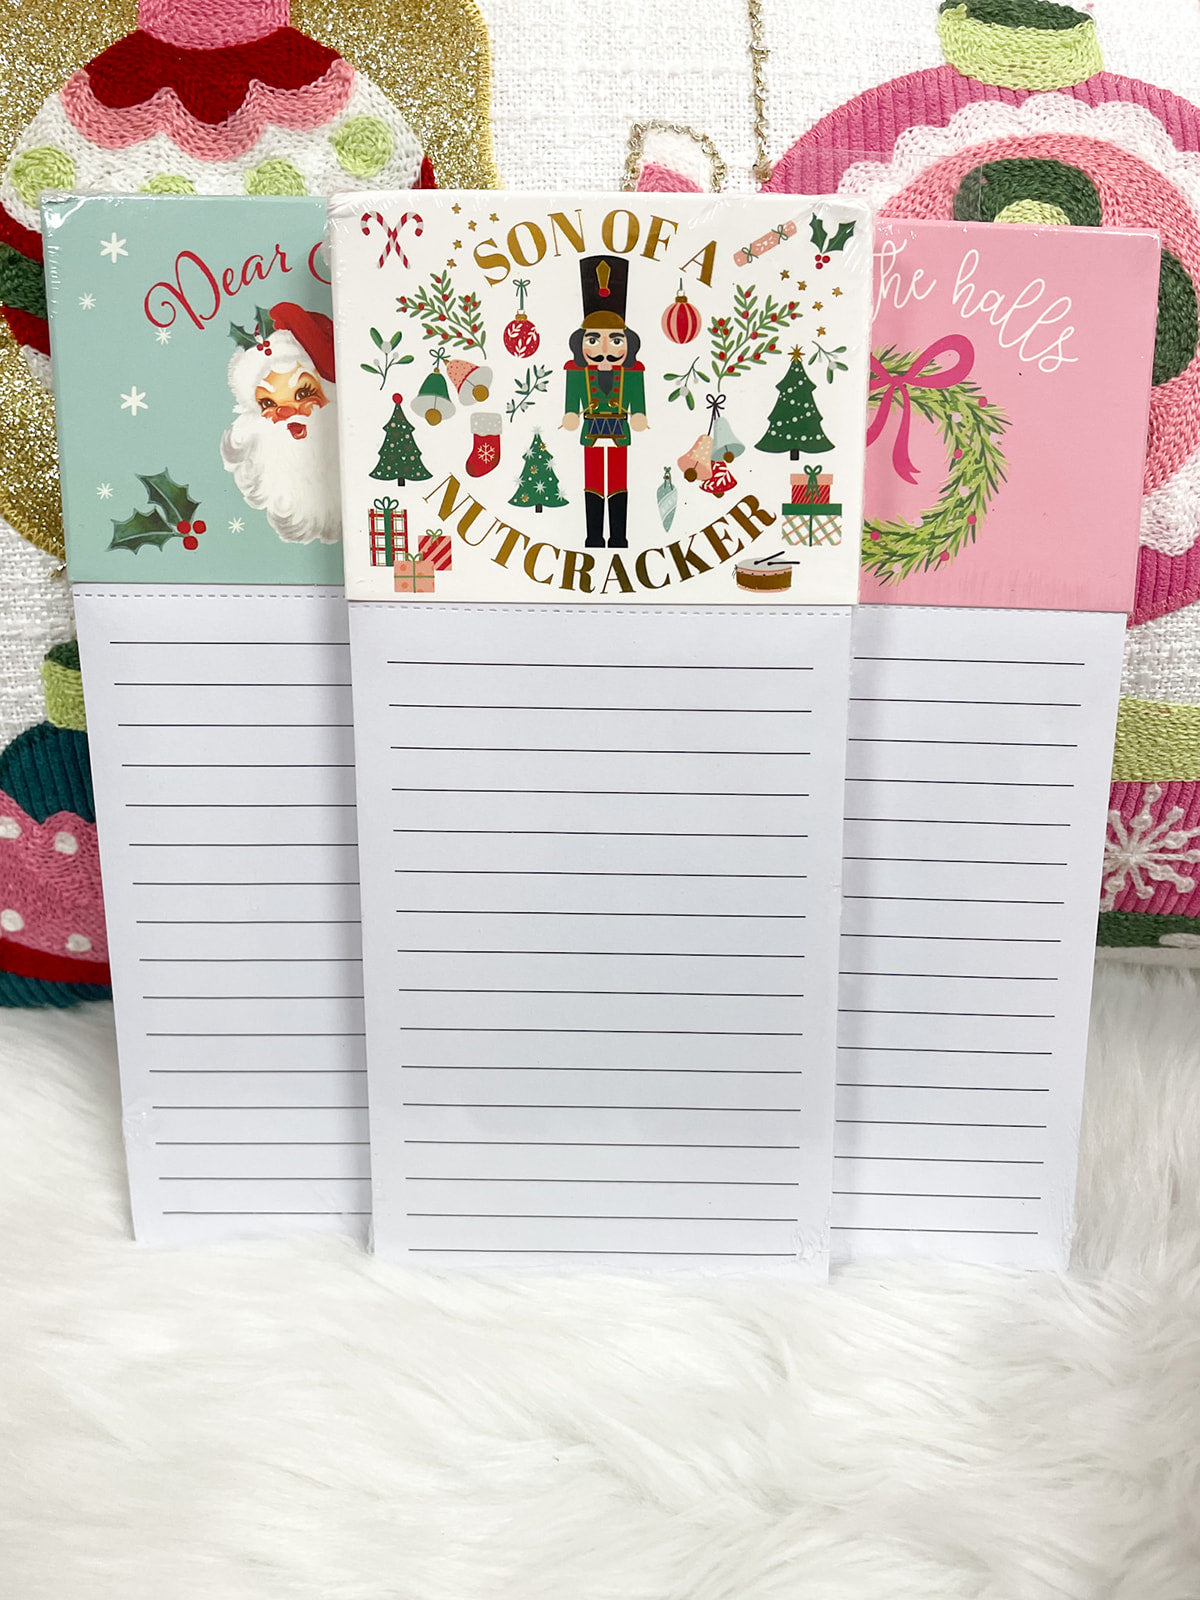 Son Of A Nutcracker Magnetic Notepad